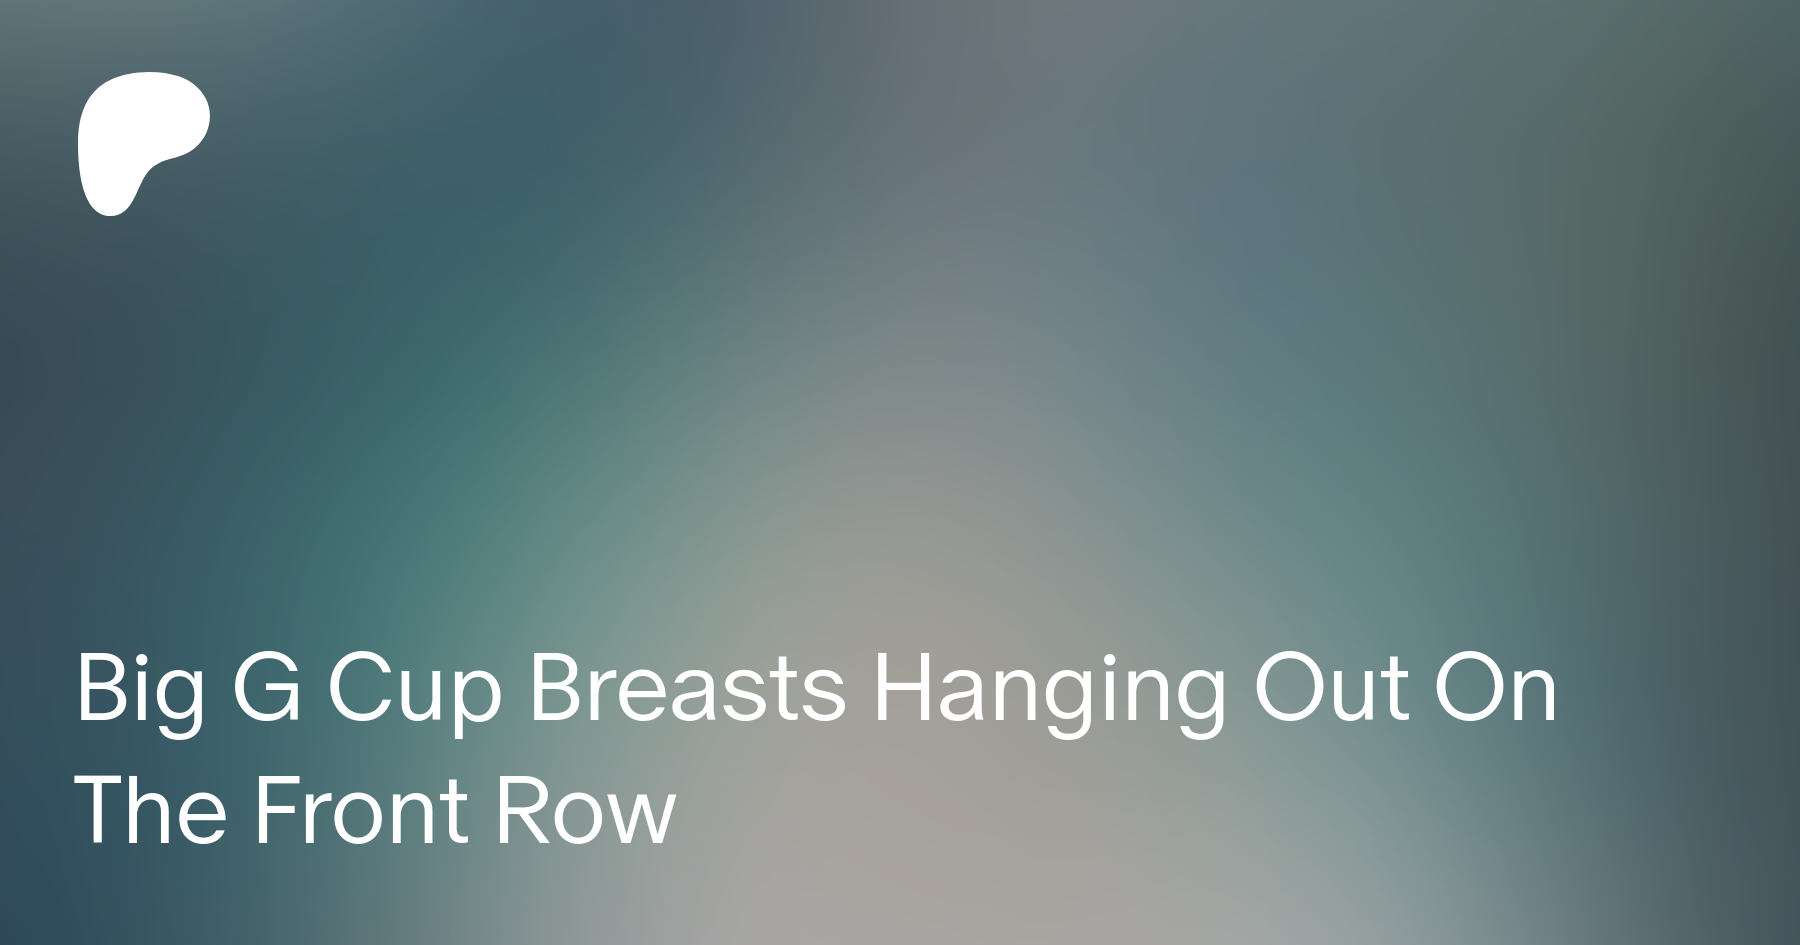 Big G Cup Breasts Hanging Out On The Front Row